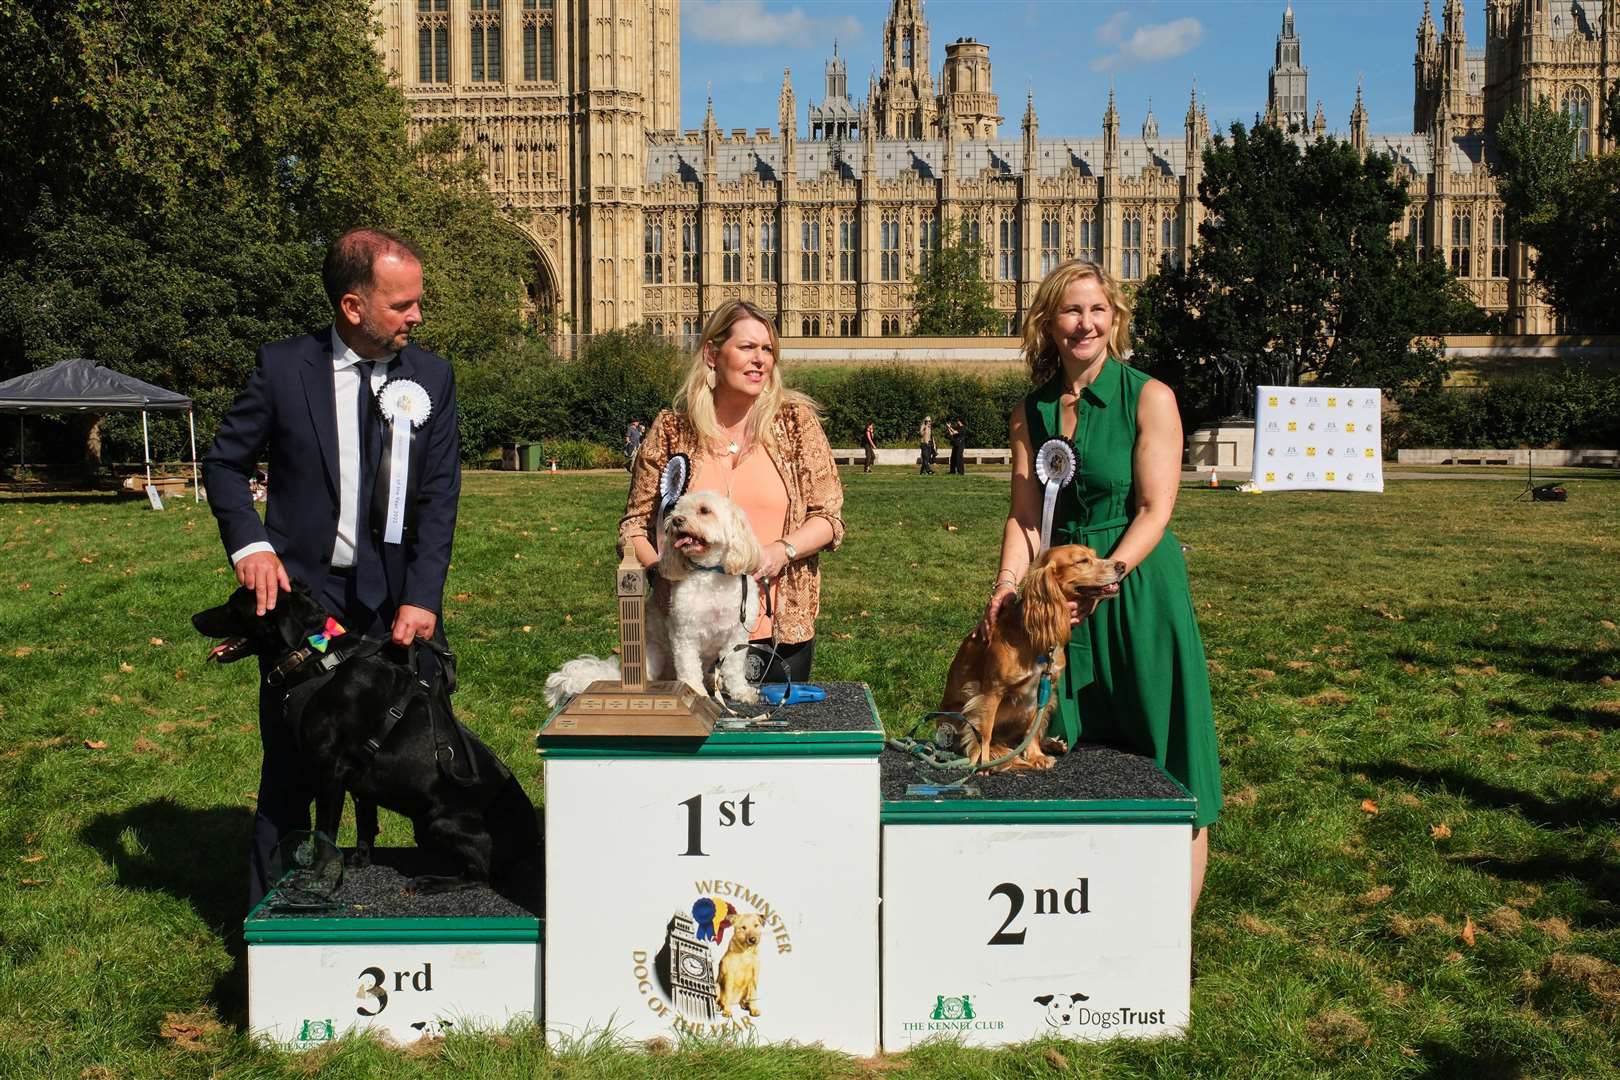 From left: James Daly wins third place with Bertie, Mims Davies wins first place with TJ and Anna McMorrin wins second place with Cadi (Michael Leckie/PA)